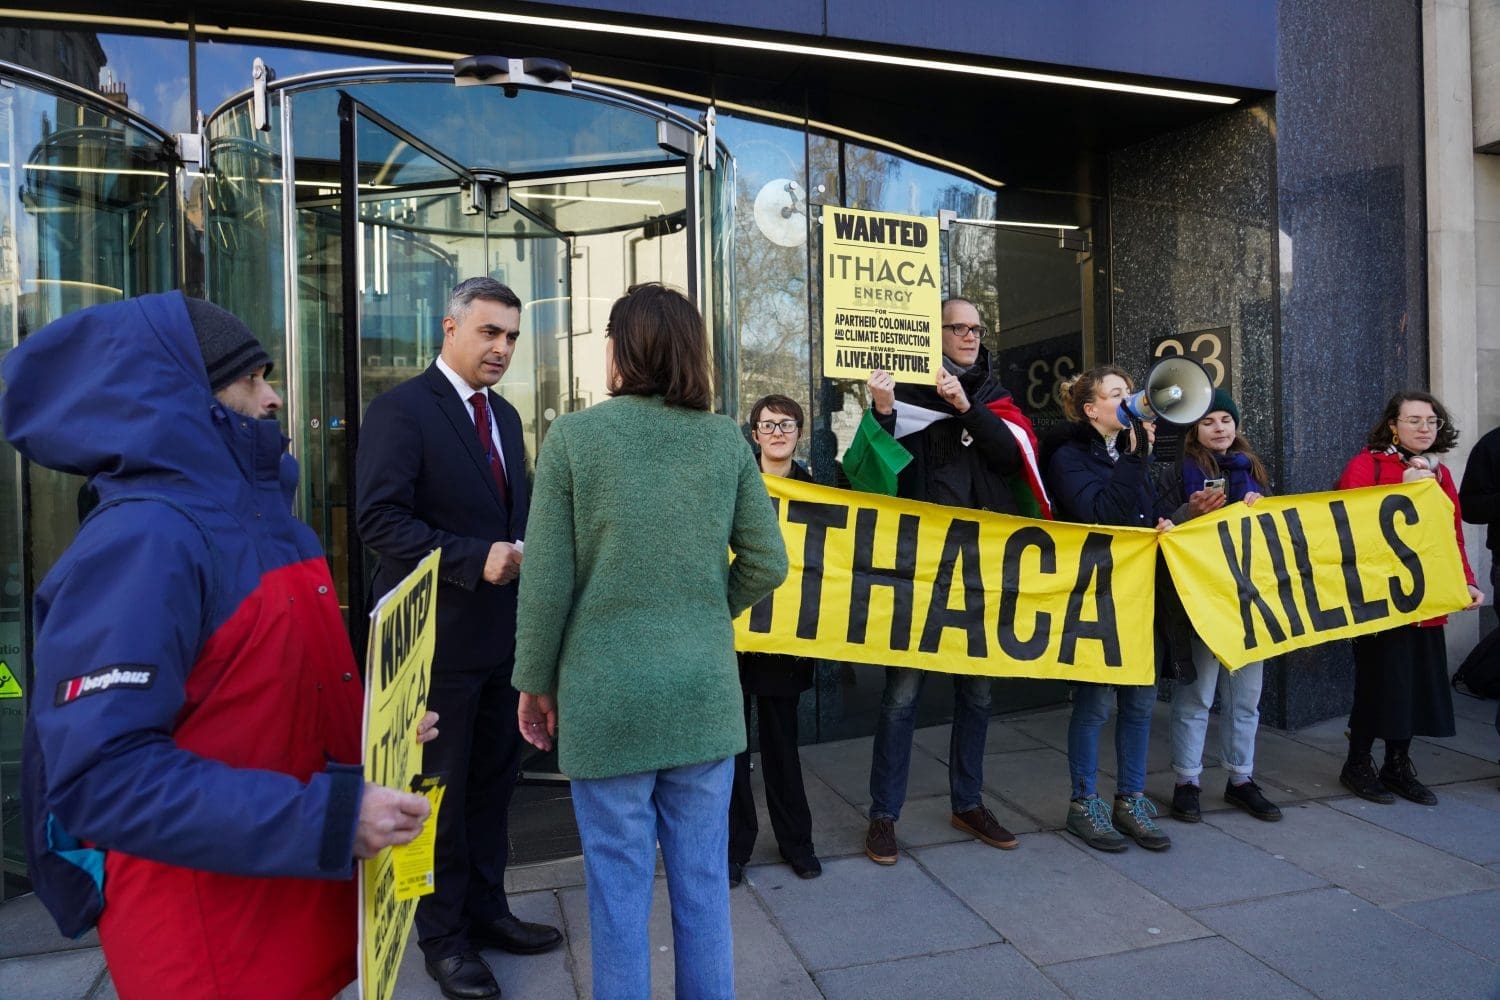 Activists engage with employees as they enter Ithaca's offices. Banner reads: "Ithaca Kills".